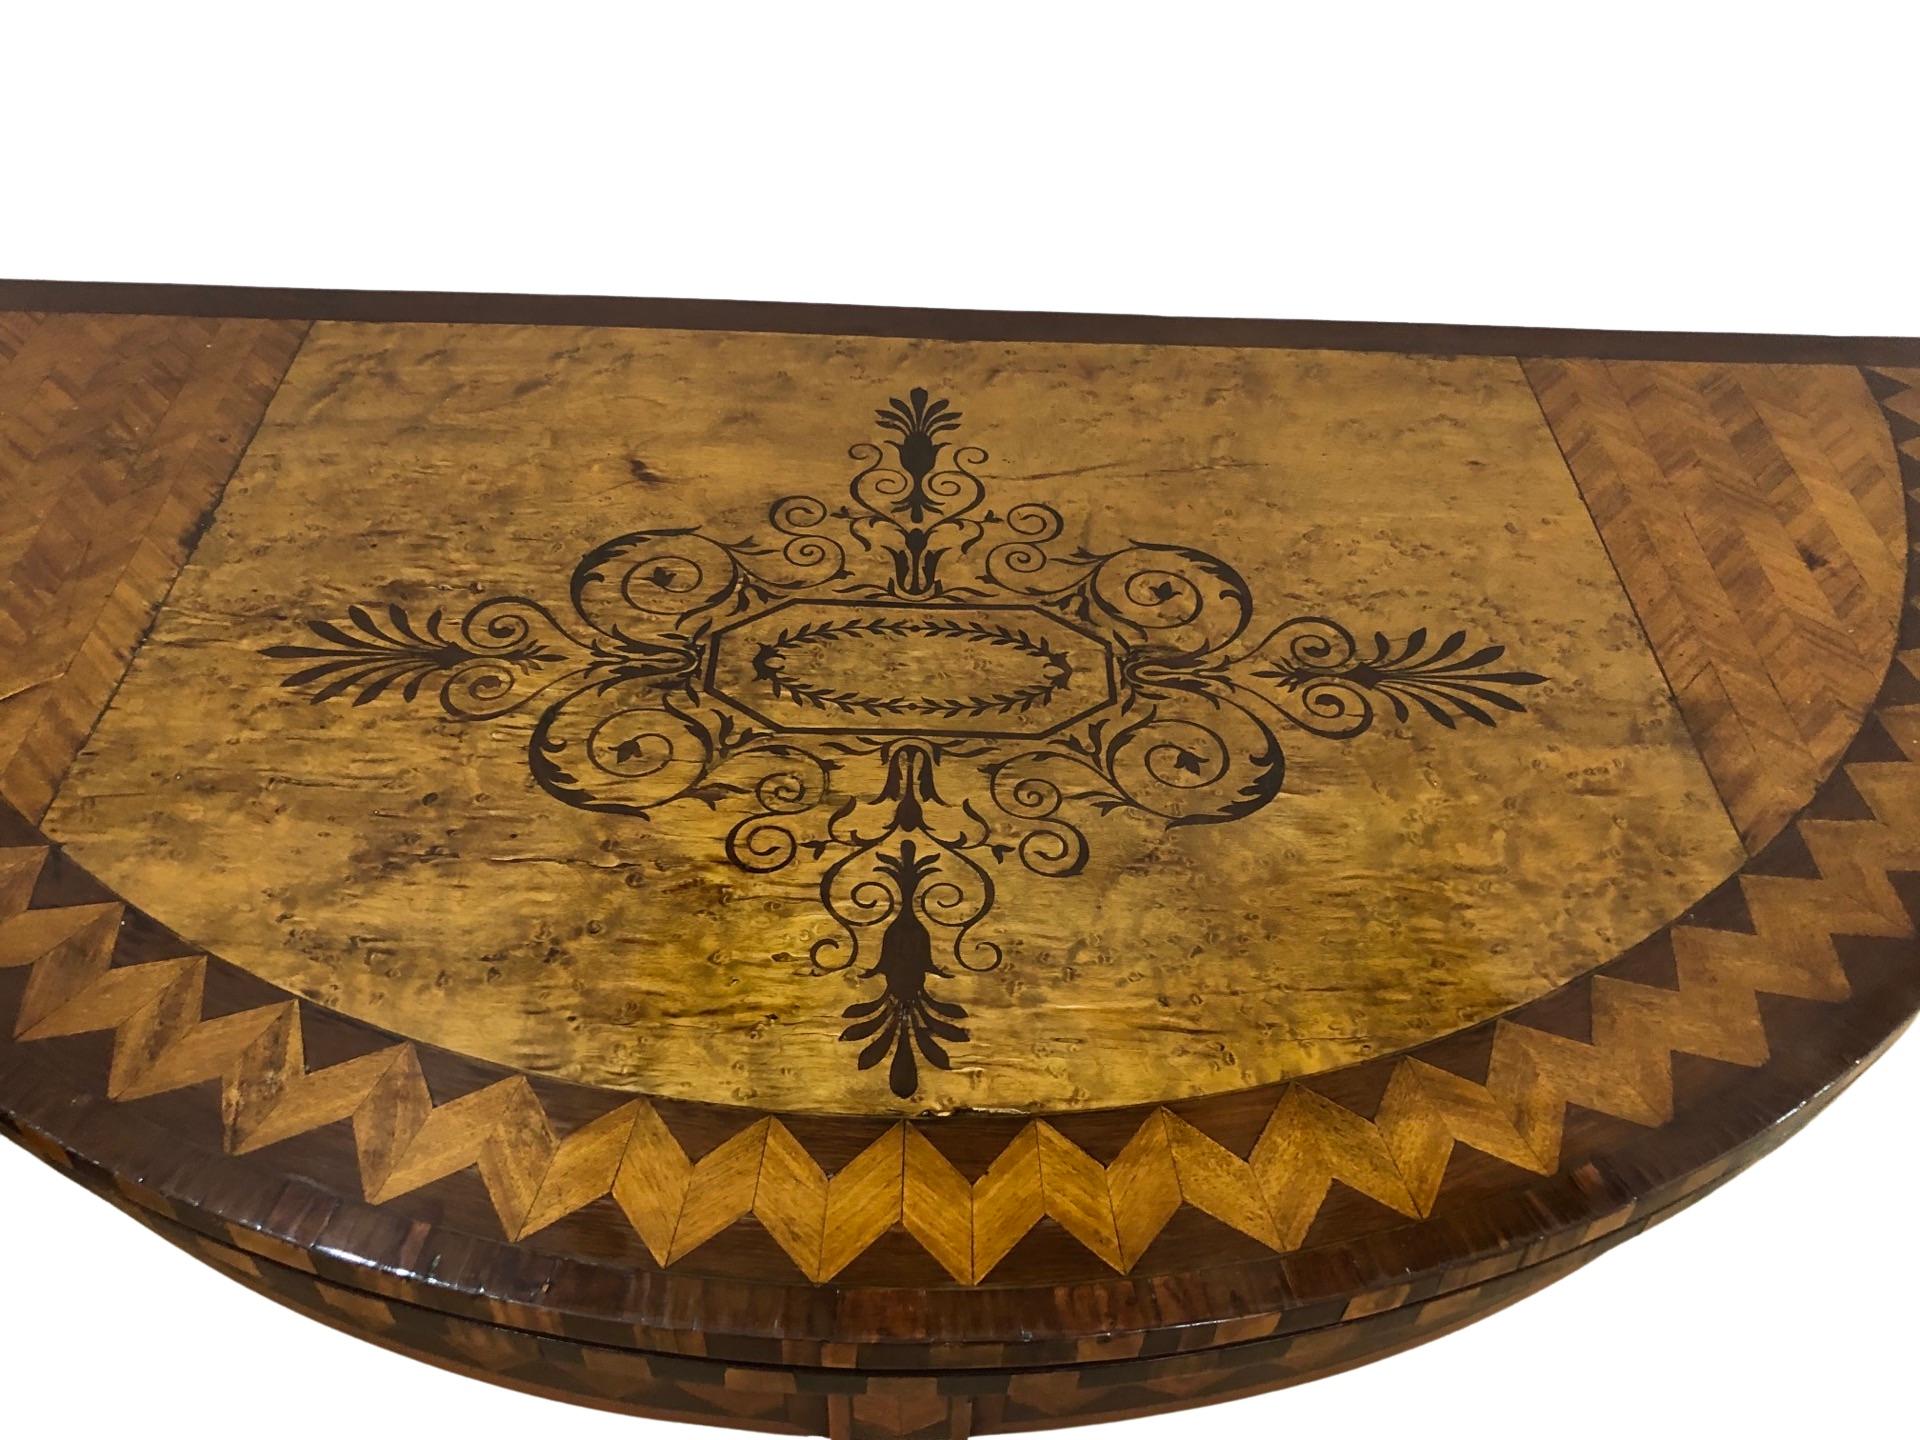 Late 18th century or more likely early 19th century English demi-lune card or game table with a beautiful inlaid top. The inlaid top features a birds eye maple with a mahogany inlaid design. Mahogany border flanks the herringbone design. Top opens